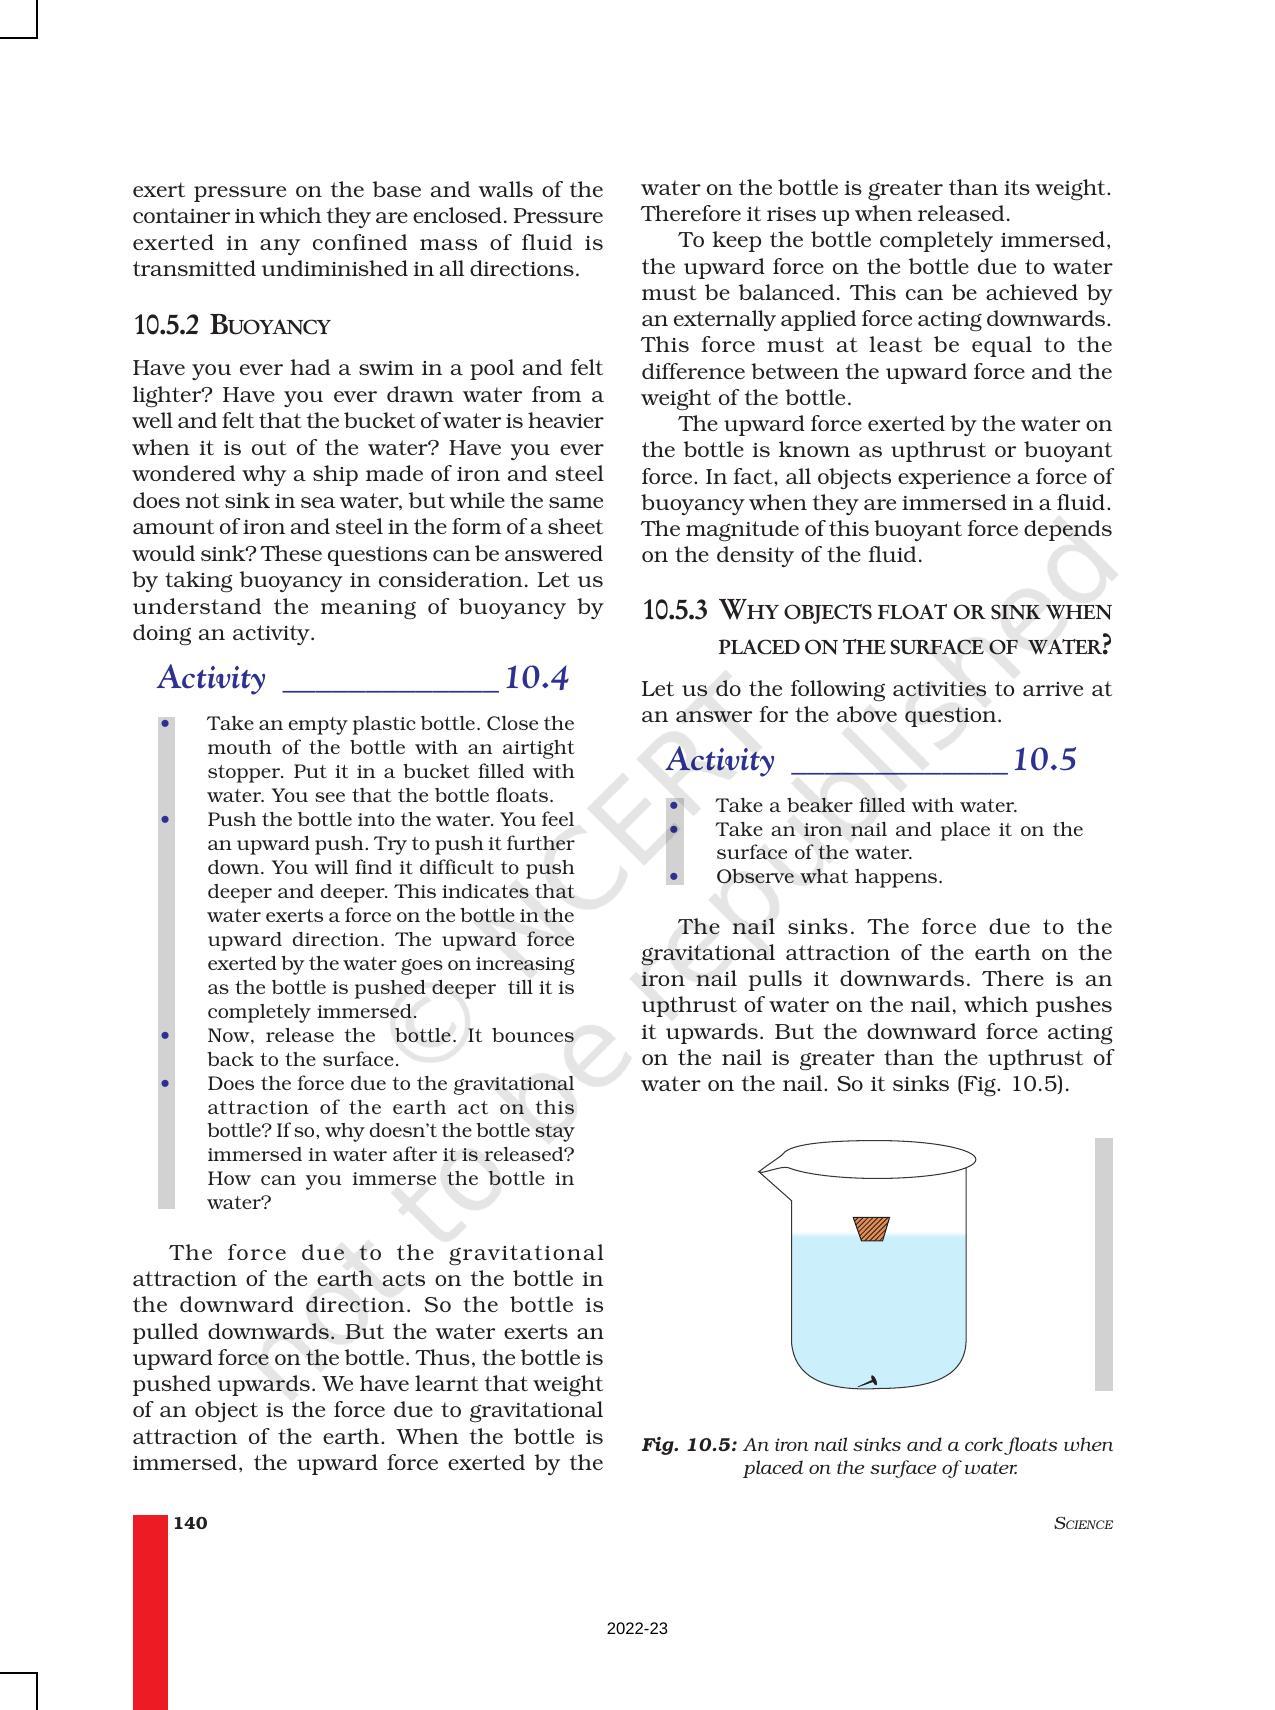 NCERT Book for Class 9 Science Chapter 10 Gravitation - Page 10